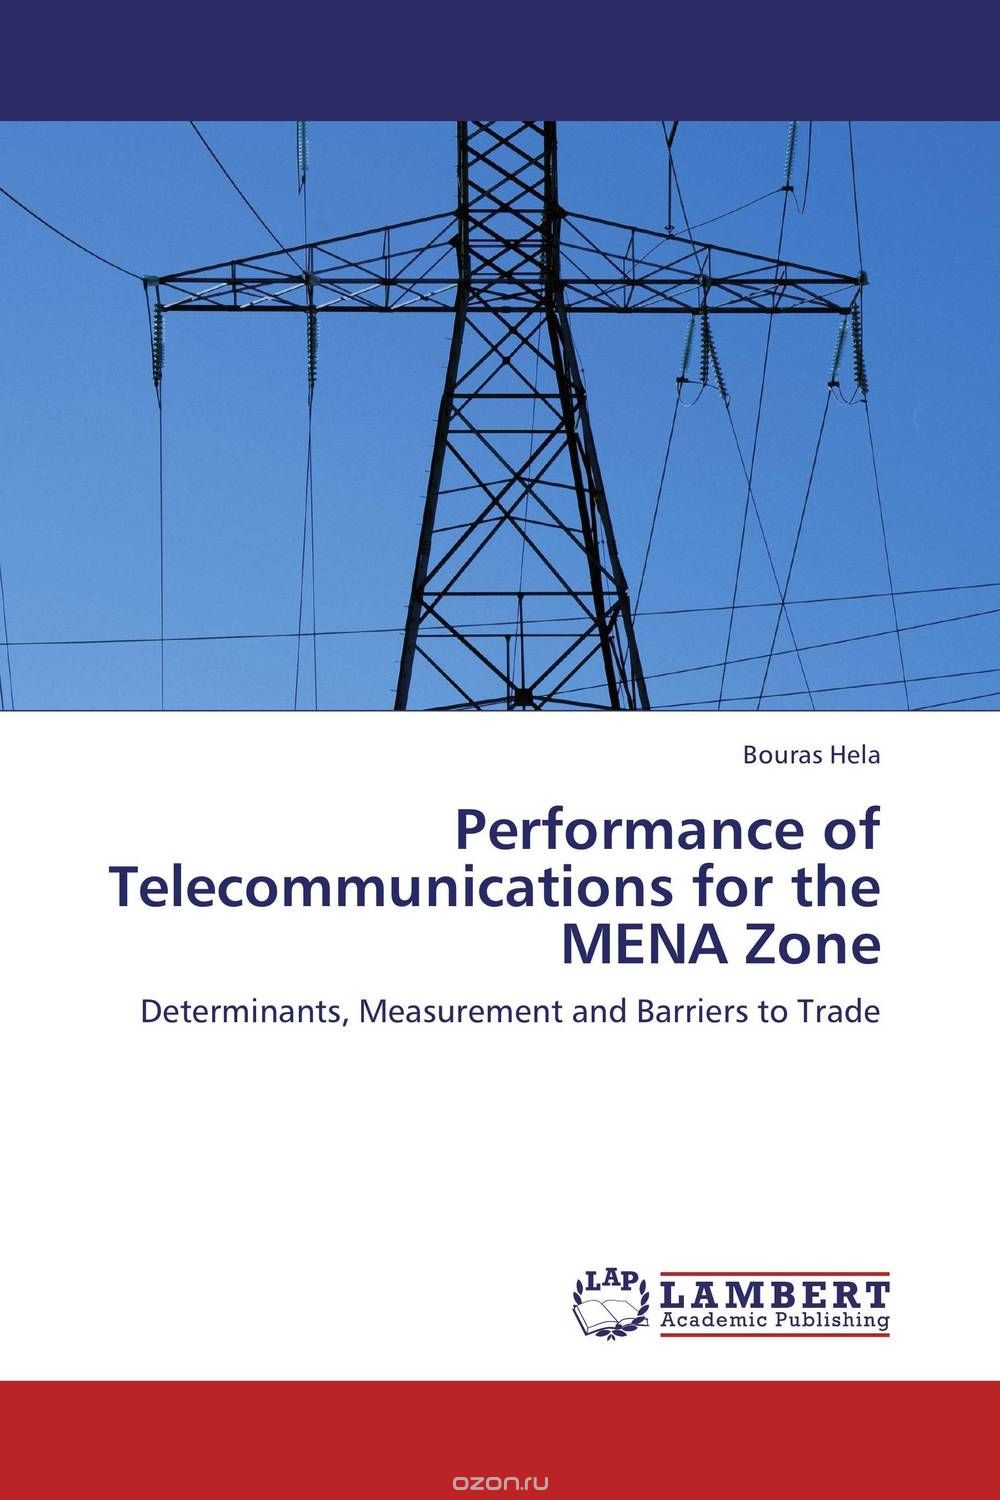 Performance of Telecommunications for the MENA Zone